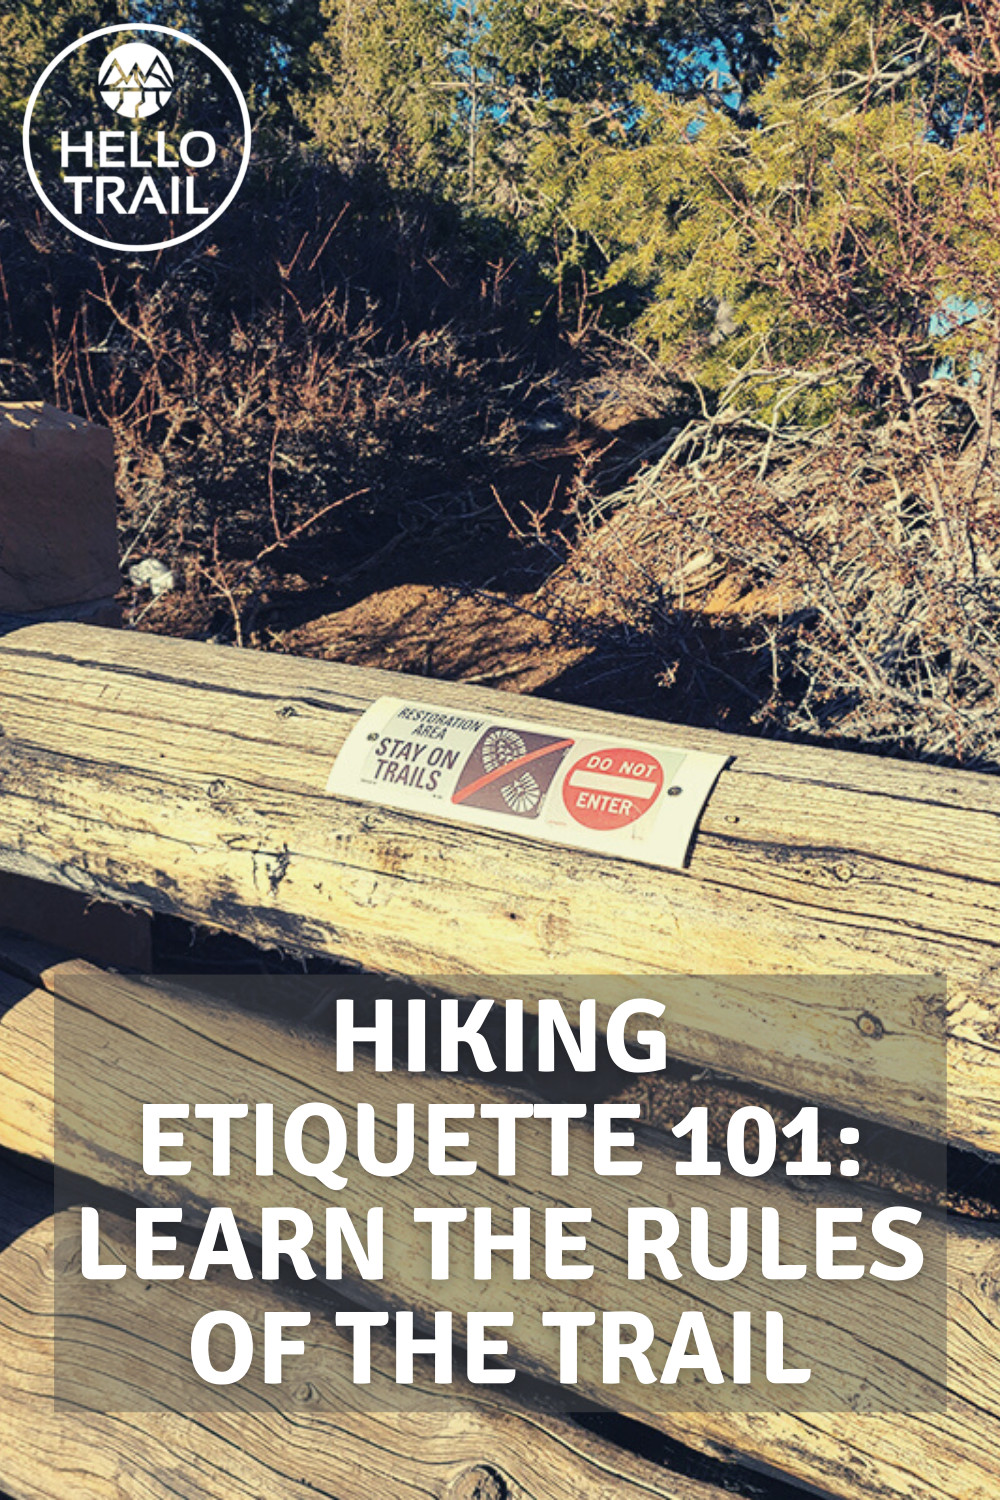 Hiking etiquette 101, learn the rules! - HelloTrail.com